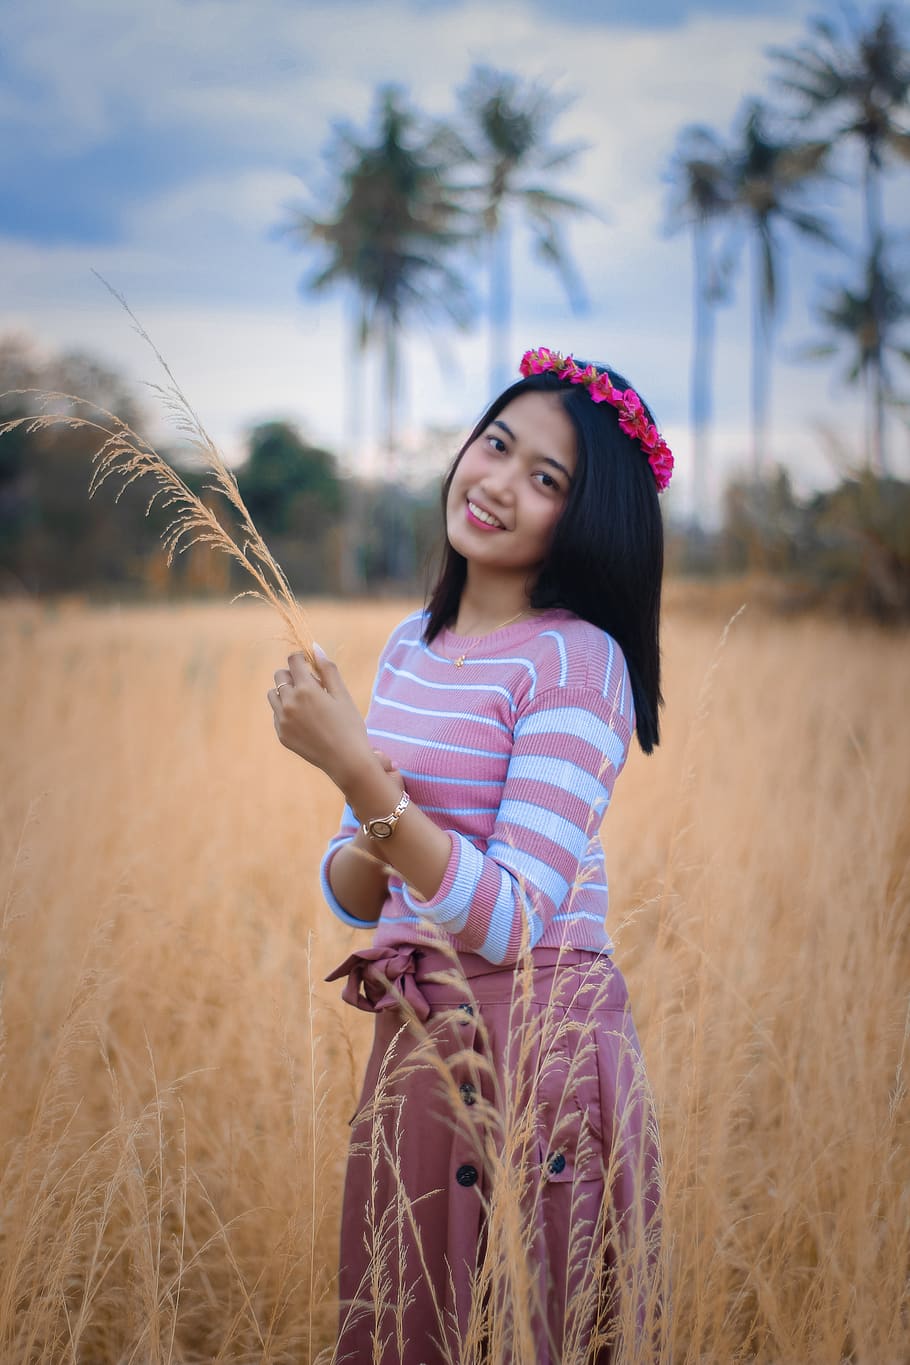 indonesia, women, girls, indonesian, model, beauty, asian, one person, real people, lifestyles